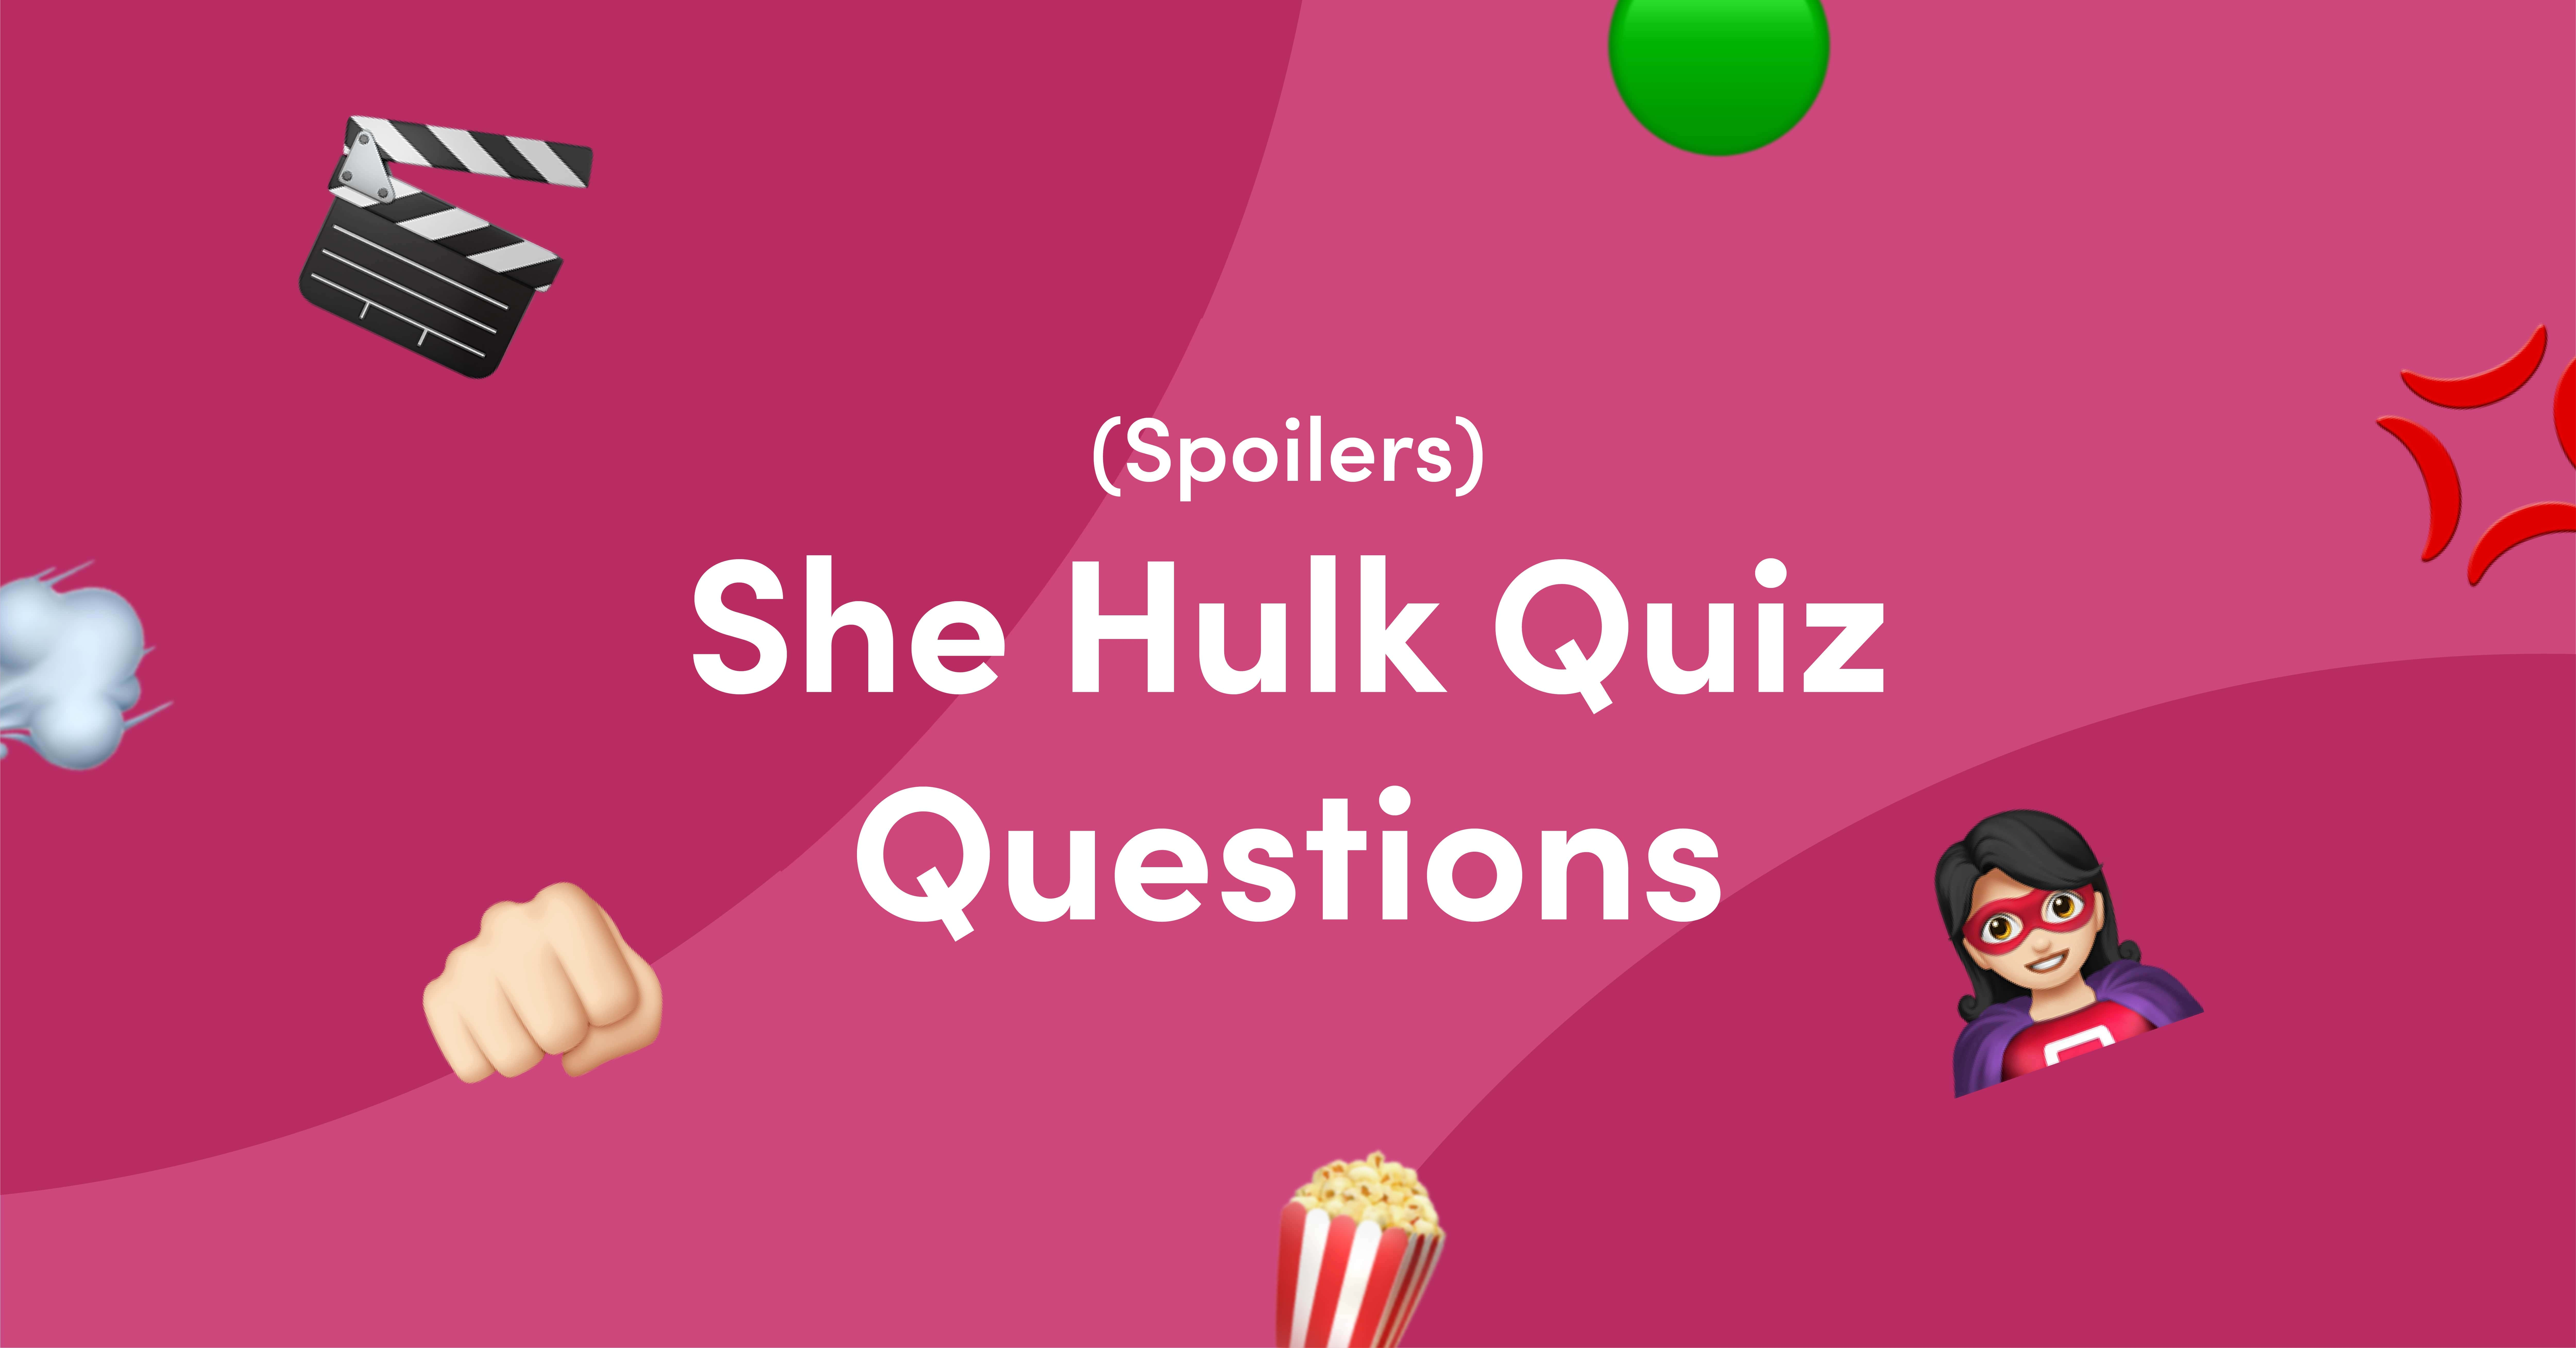 25 She-Hulk Quiz Questions and Answers [Spoilers]